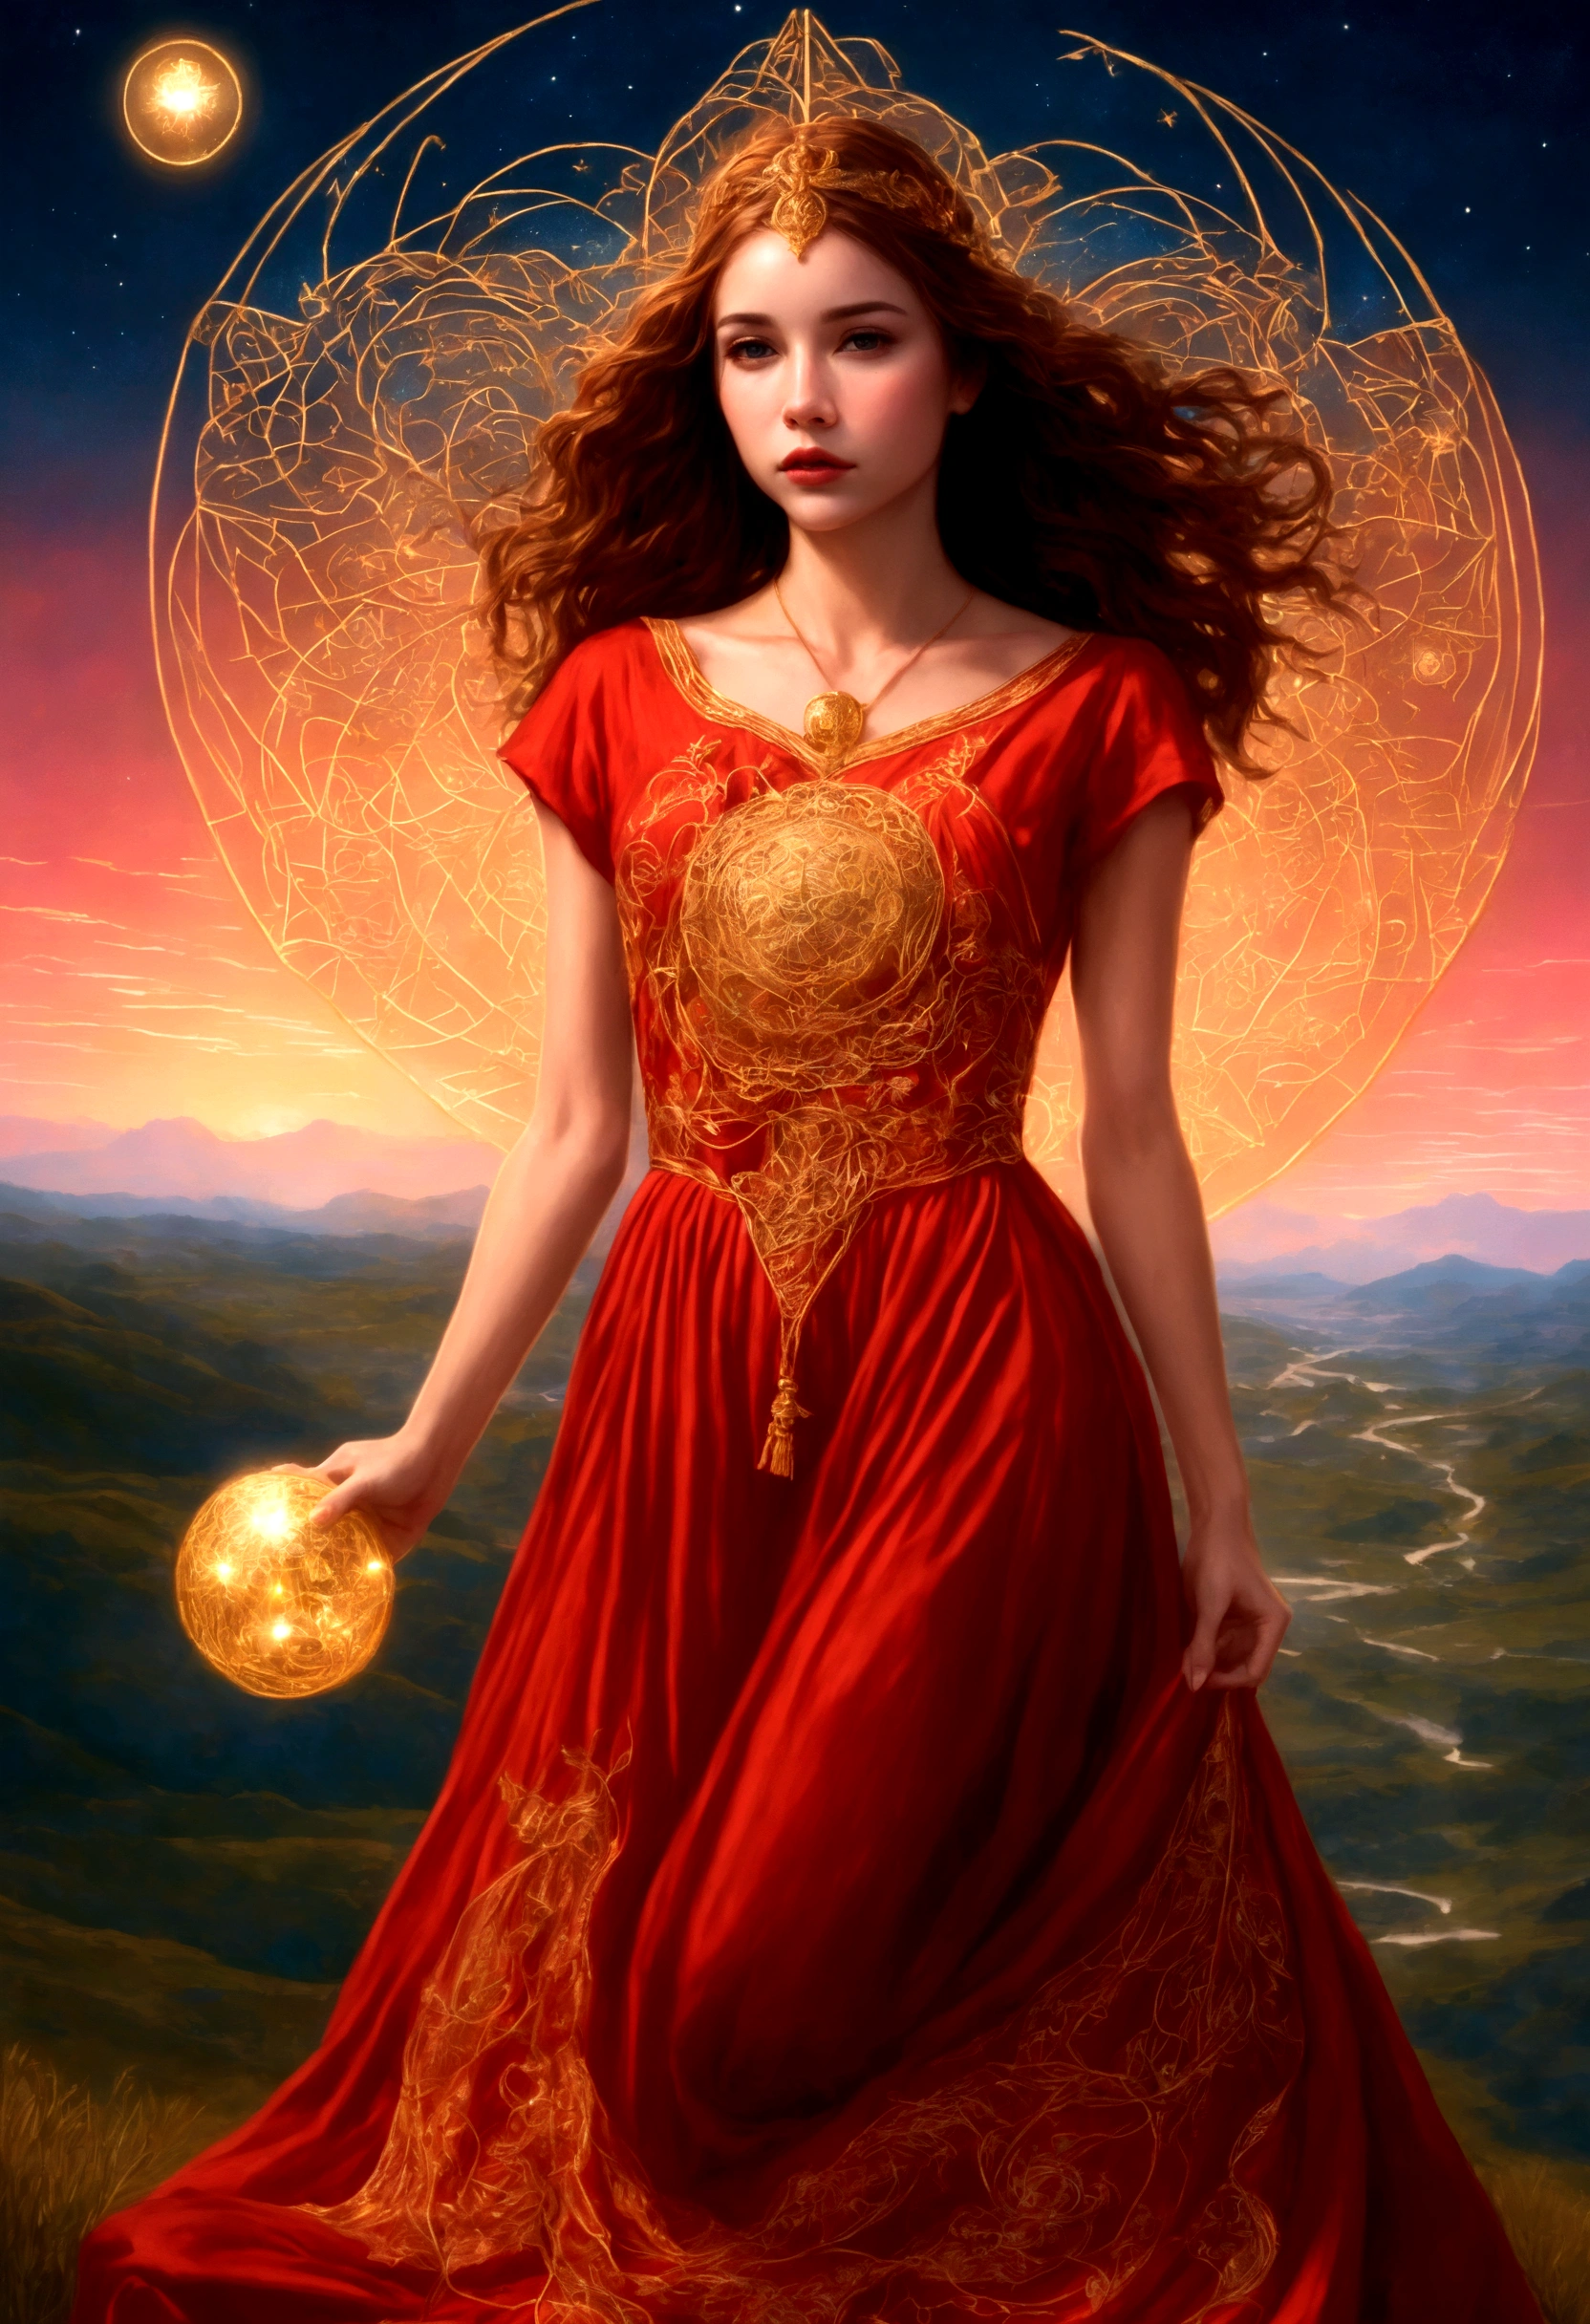 A woman in a love themed red dress with loads of intricate gold love embroidery, carrying a tome, on a hill top, two astrological sign light up brightly in the skies with the connective lines, night
